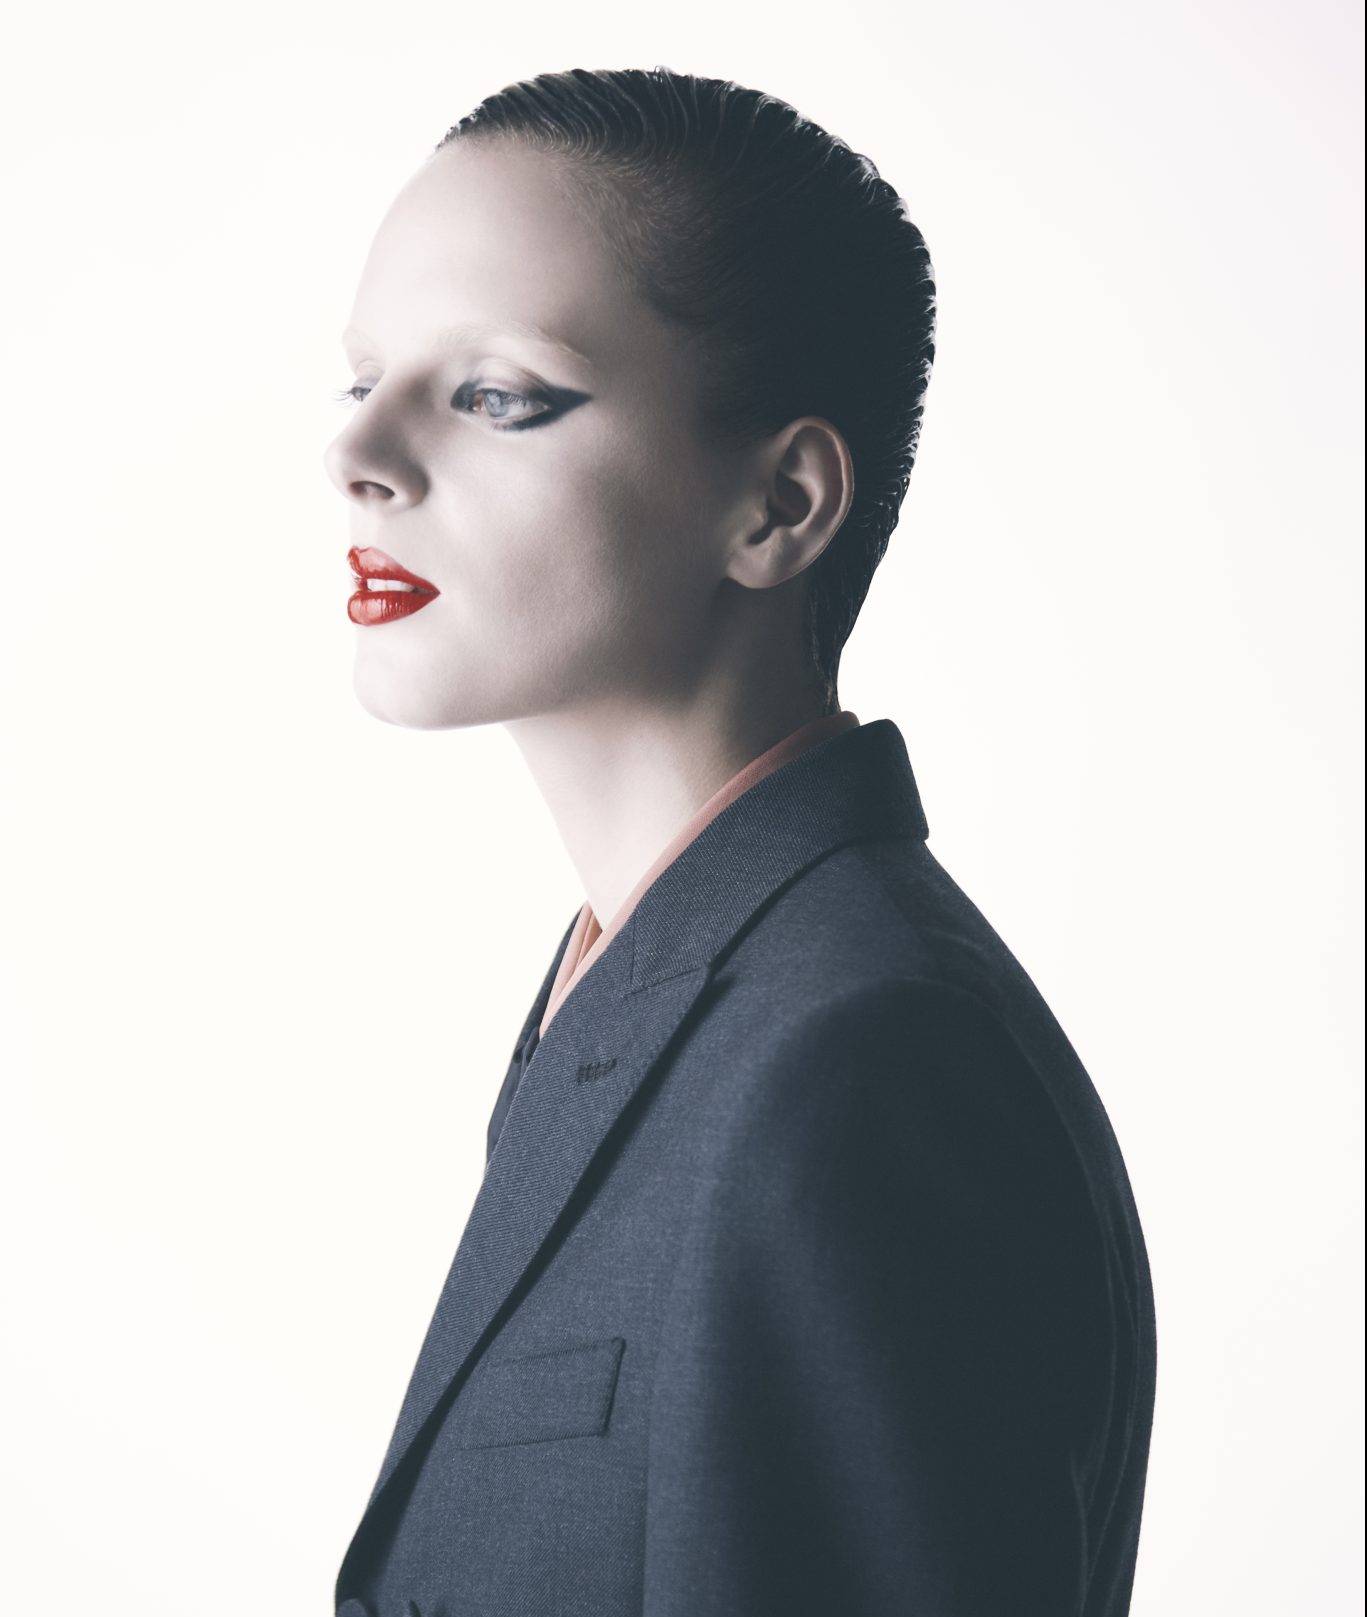 NEW EXCLUSIVE BEAUTY EDITORIAL CAPTURED BY MORGAN ROBERTS - Numéro ...